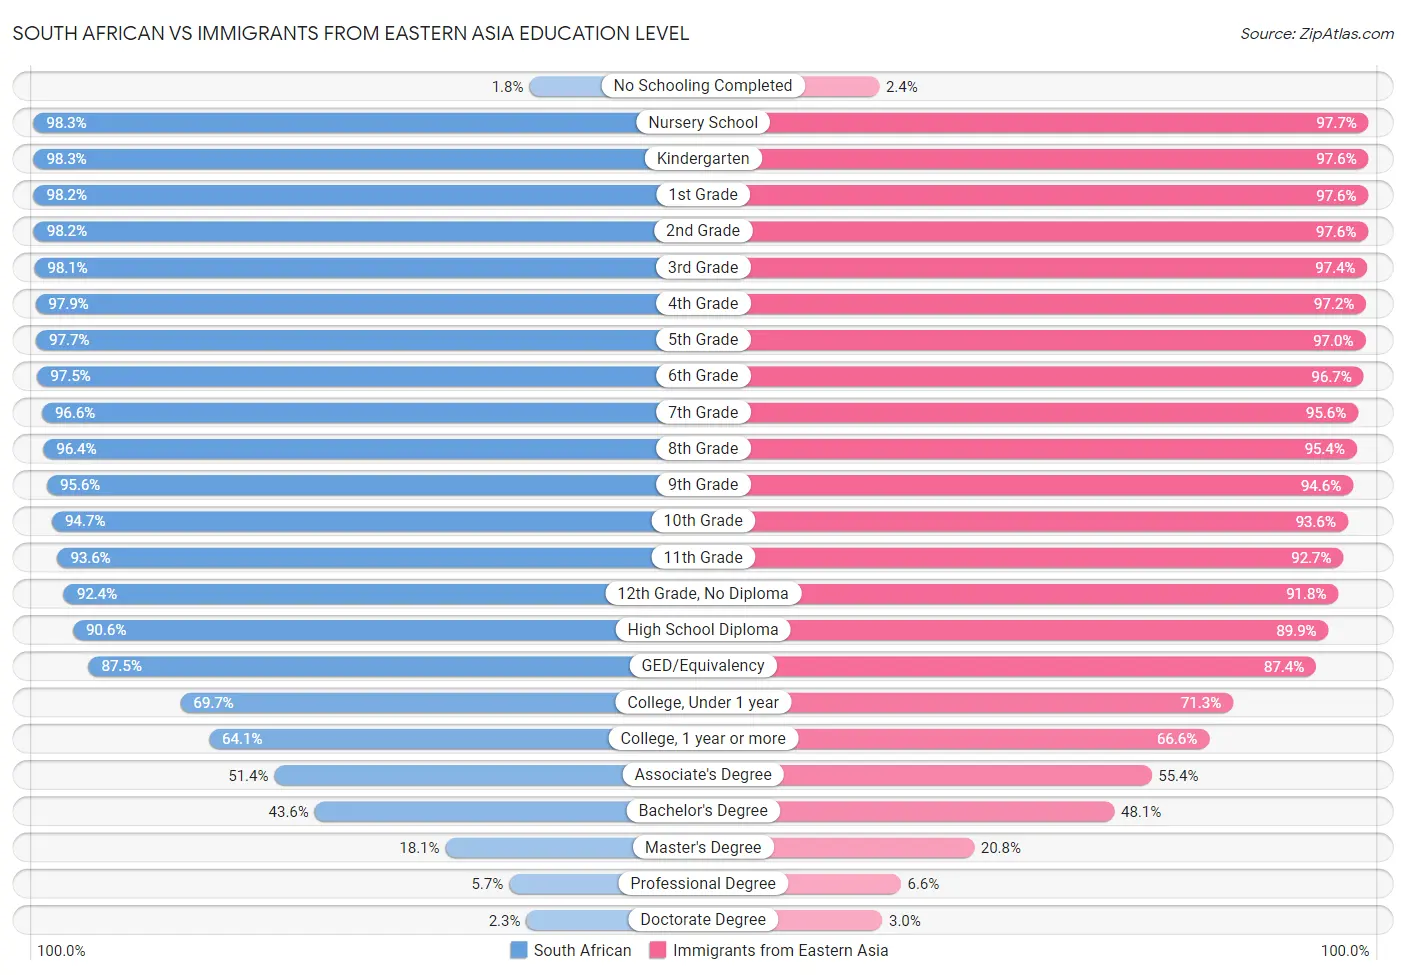 South African vs Immigrants from Eastern Asia Education Level